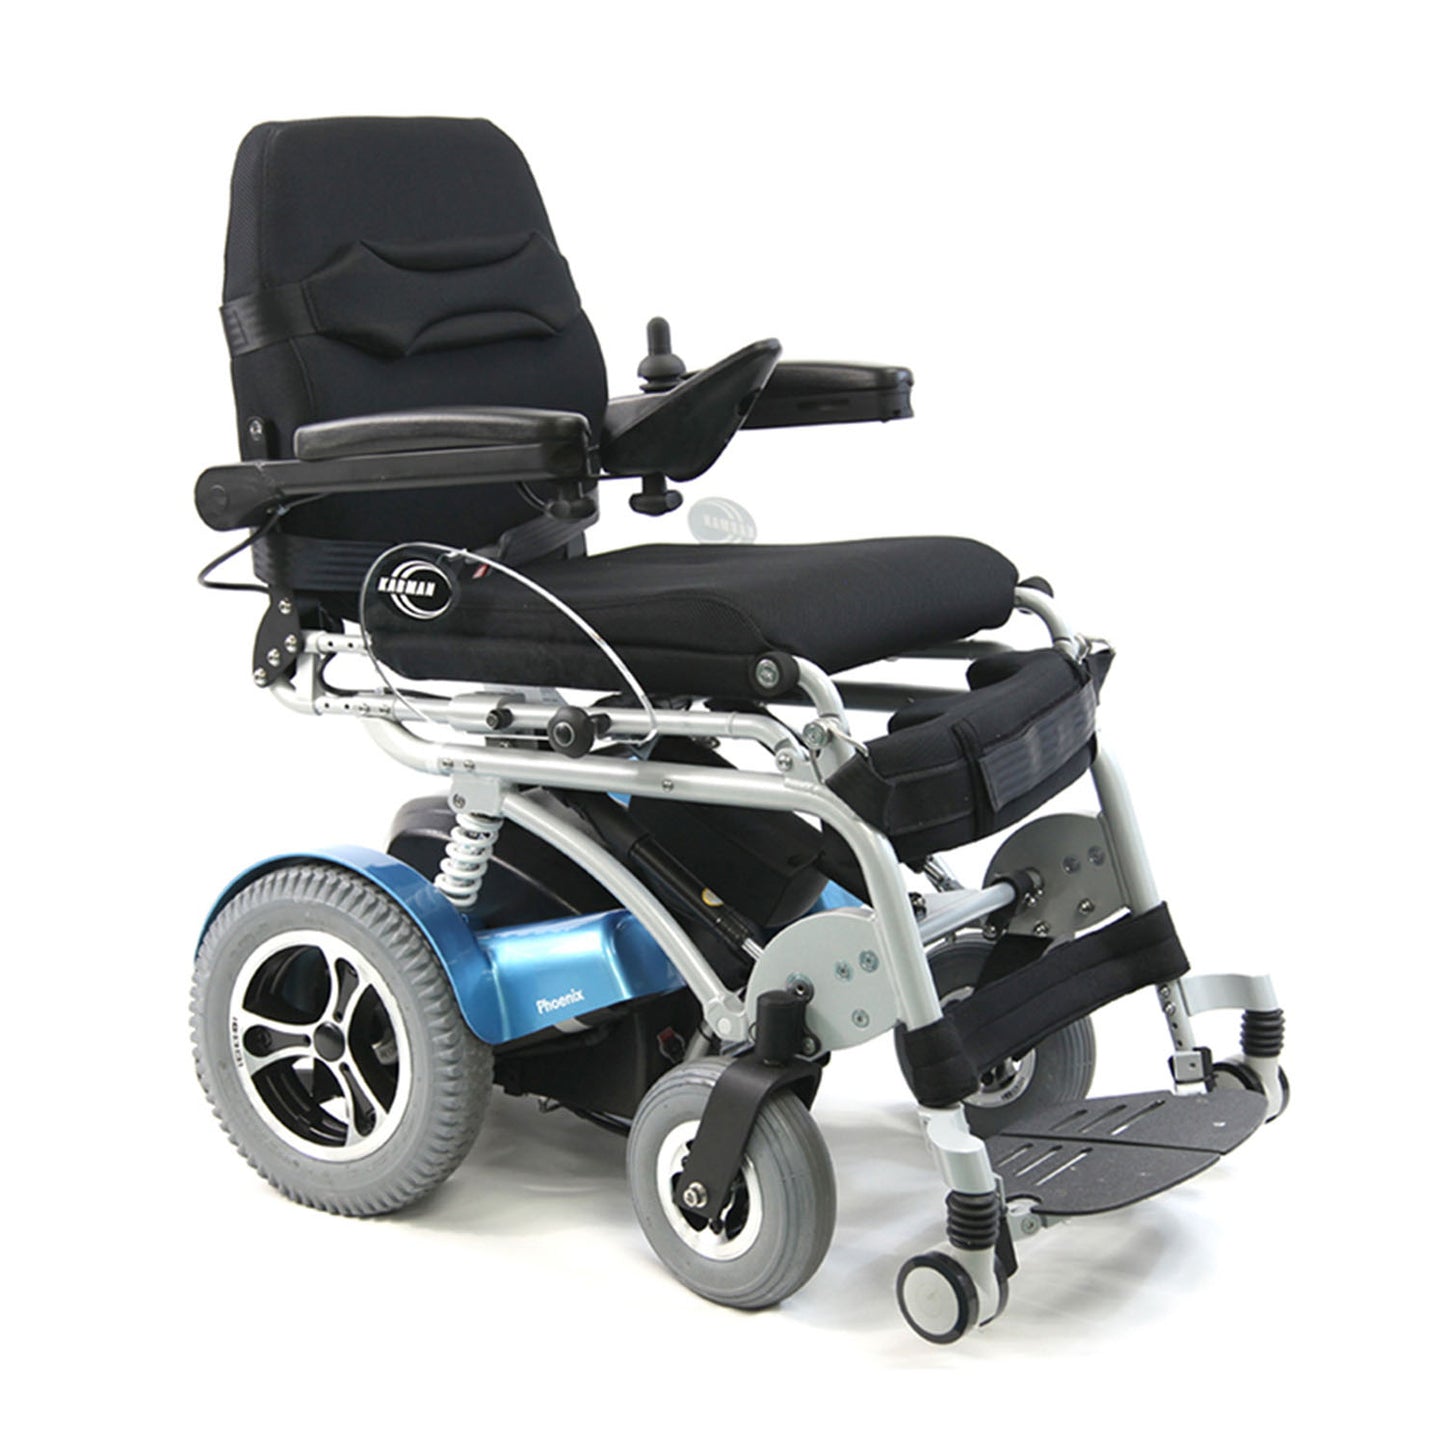 Karman XO-202 Full Power Stand Up Wheelchair, Runs Off 25 Miles Per Charge, 18 inch in Width, Aluminum Frame